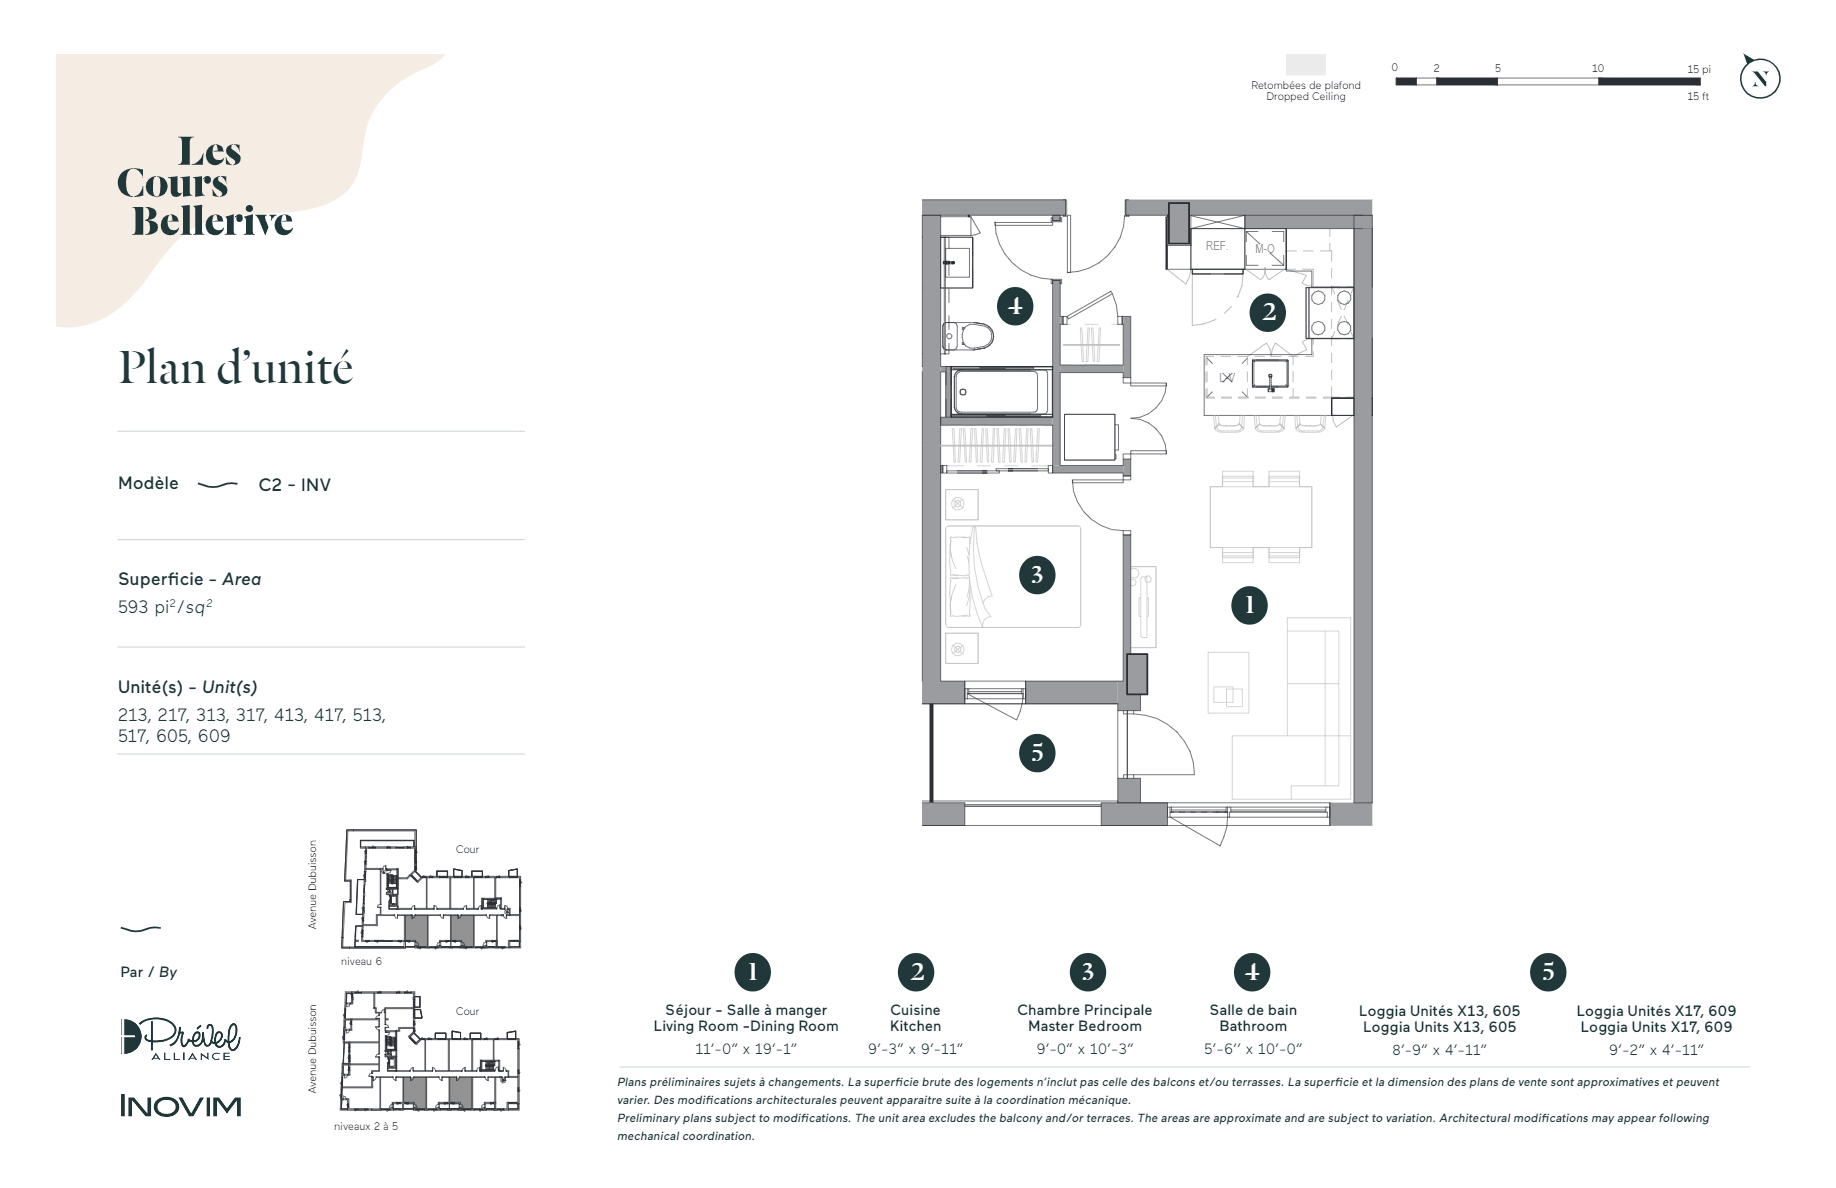  Floor Plan of Les Cours Bellerive - Phase 2 with undefined beds